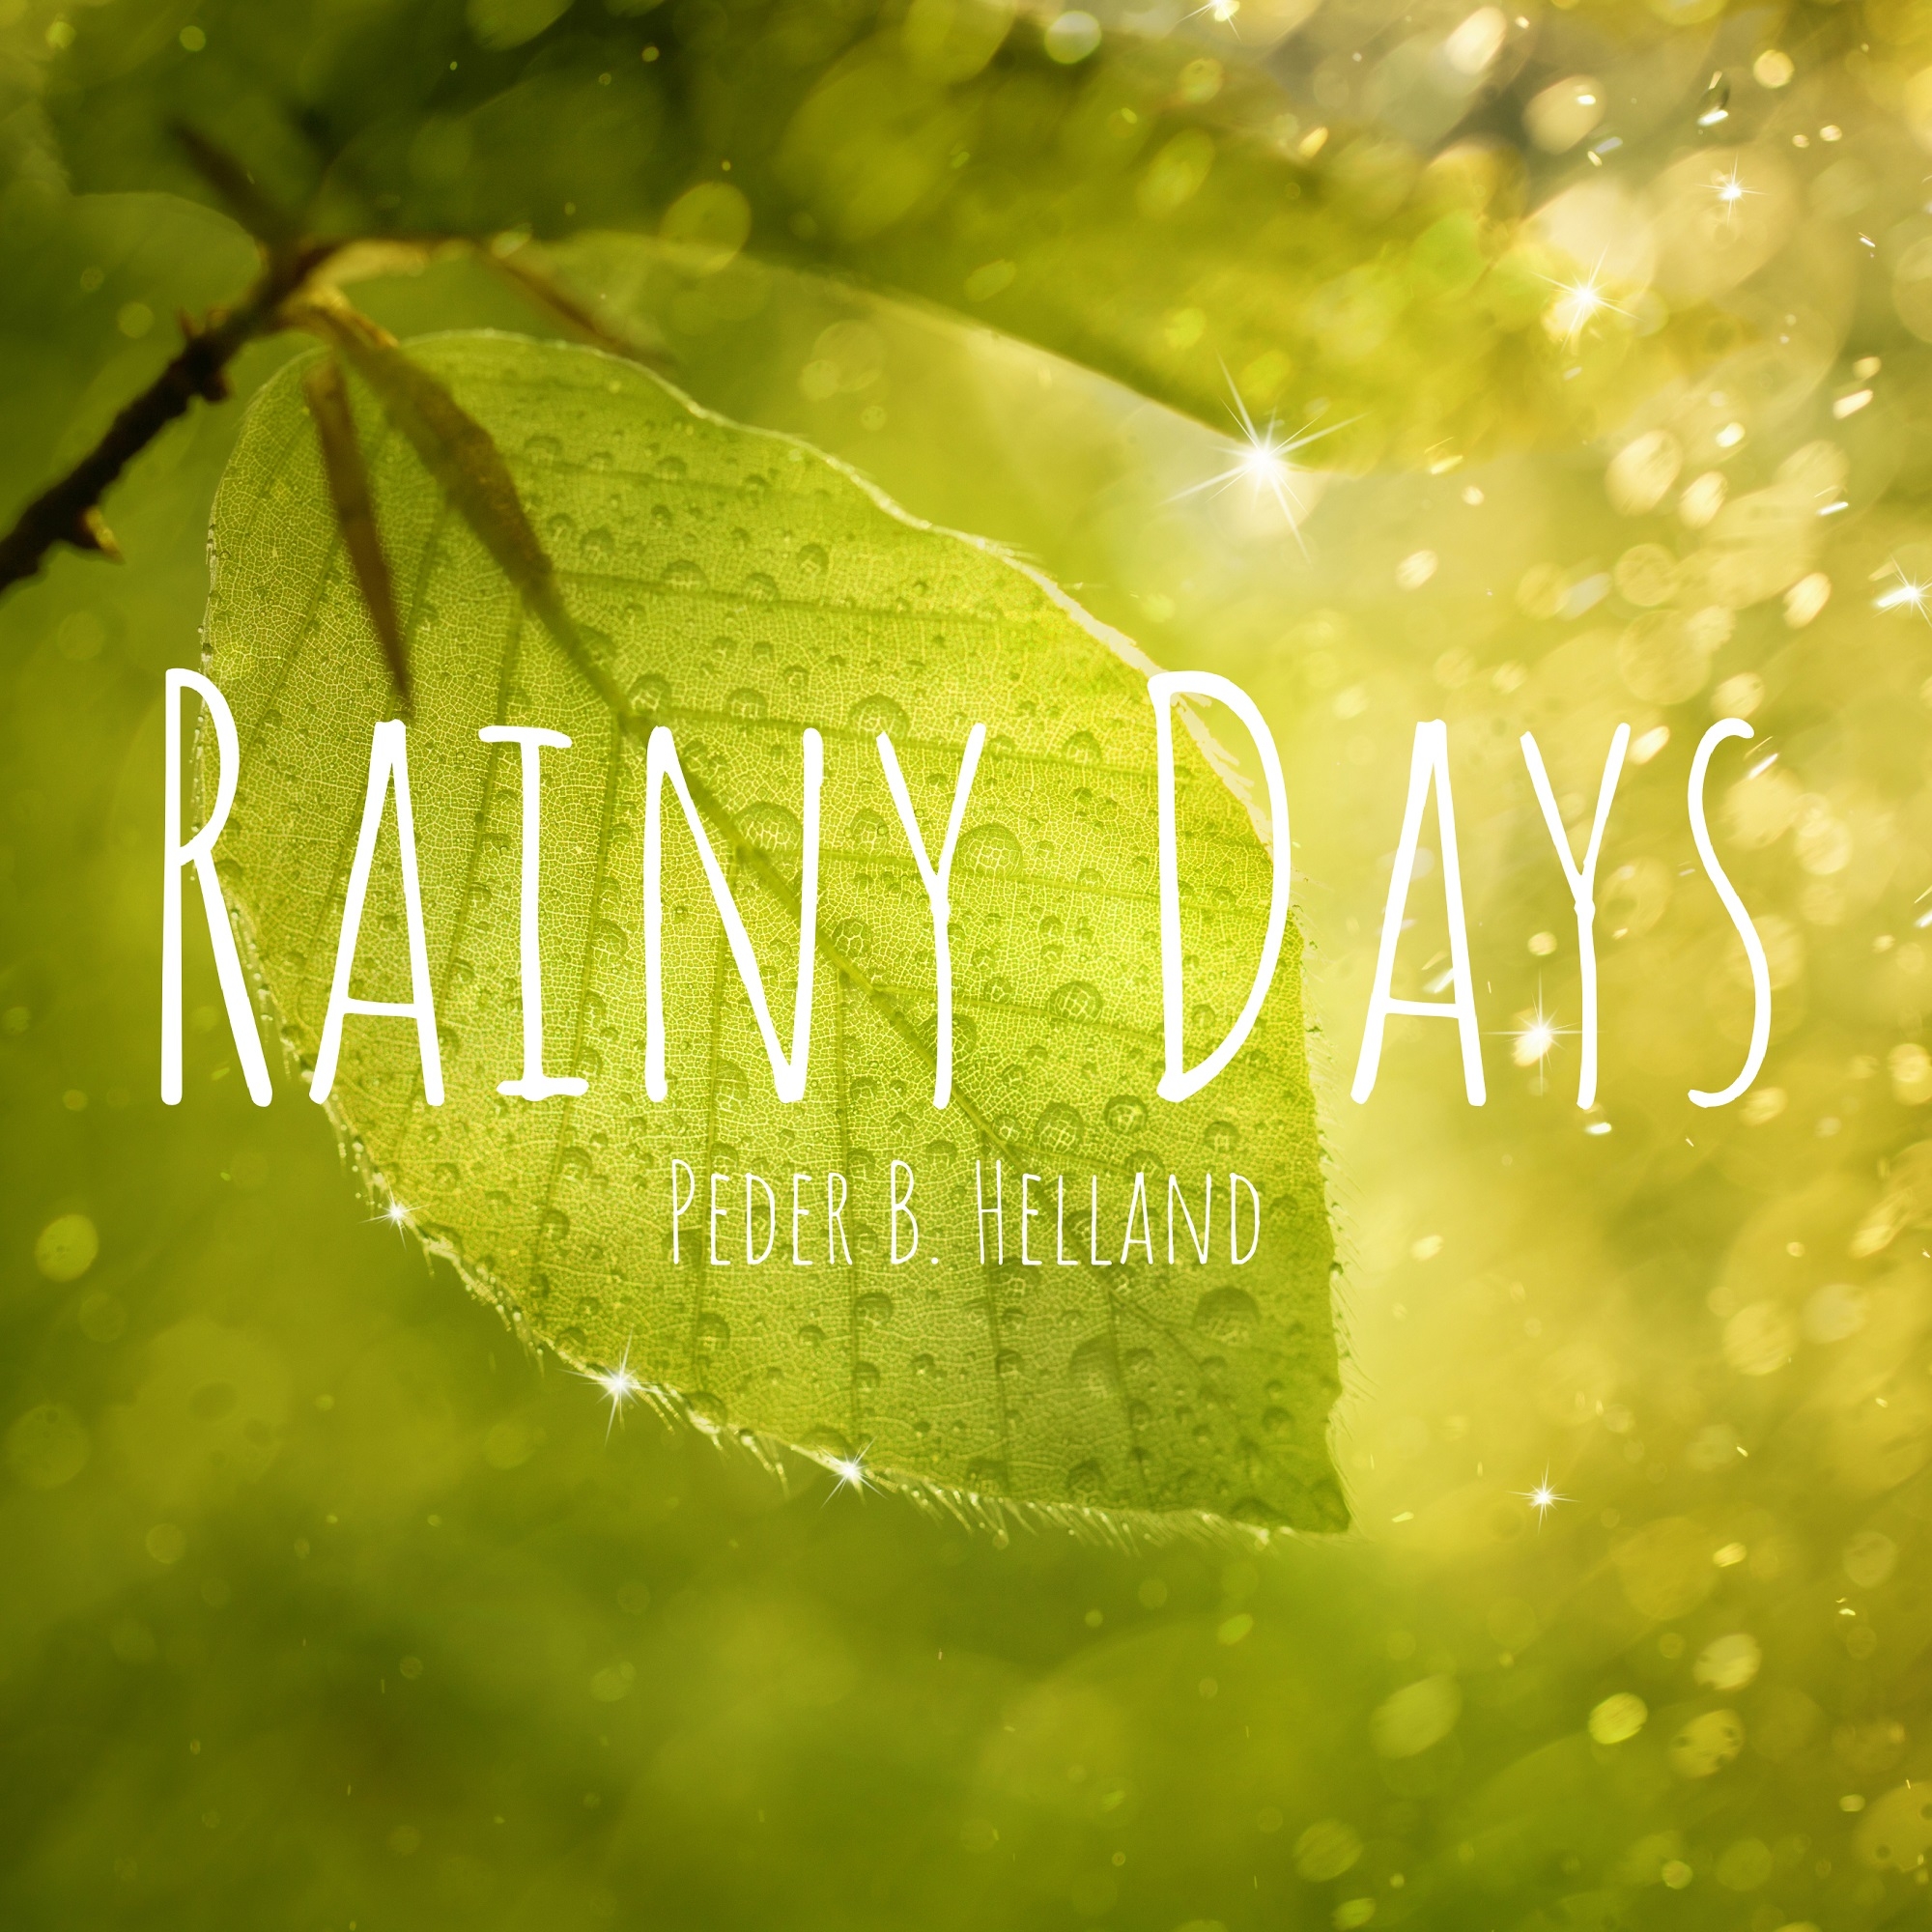 Cover art for the single Rainy Day by Peder B. Helland